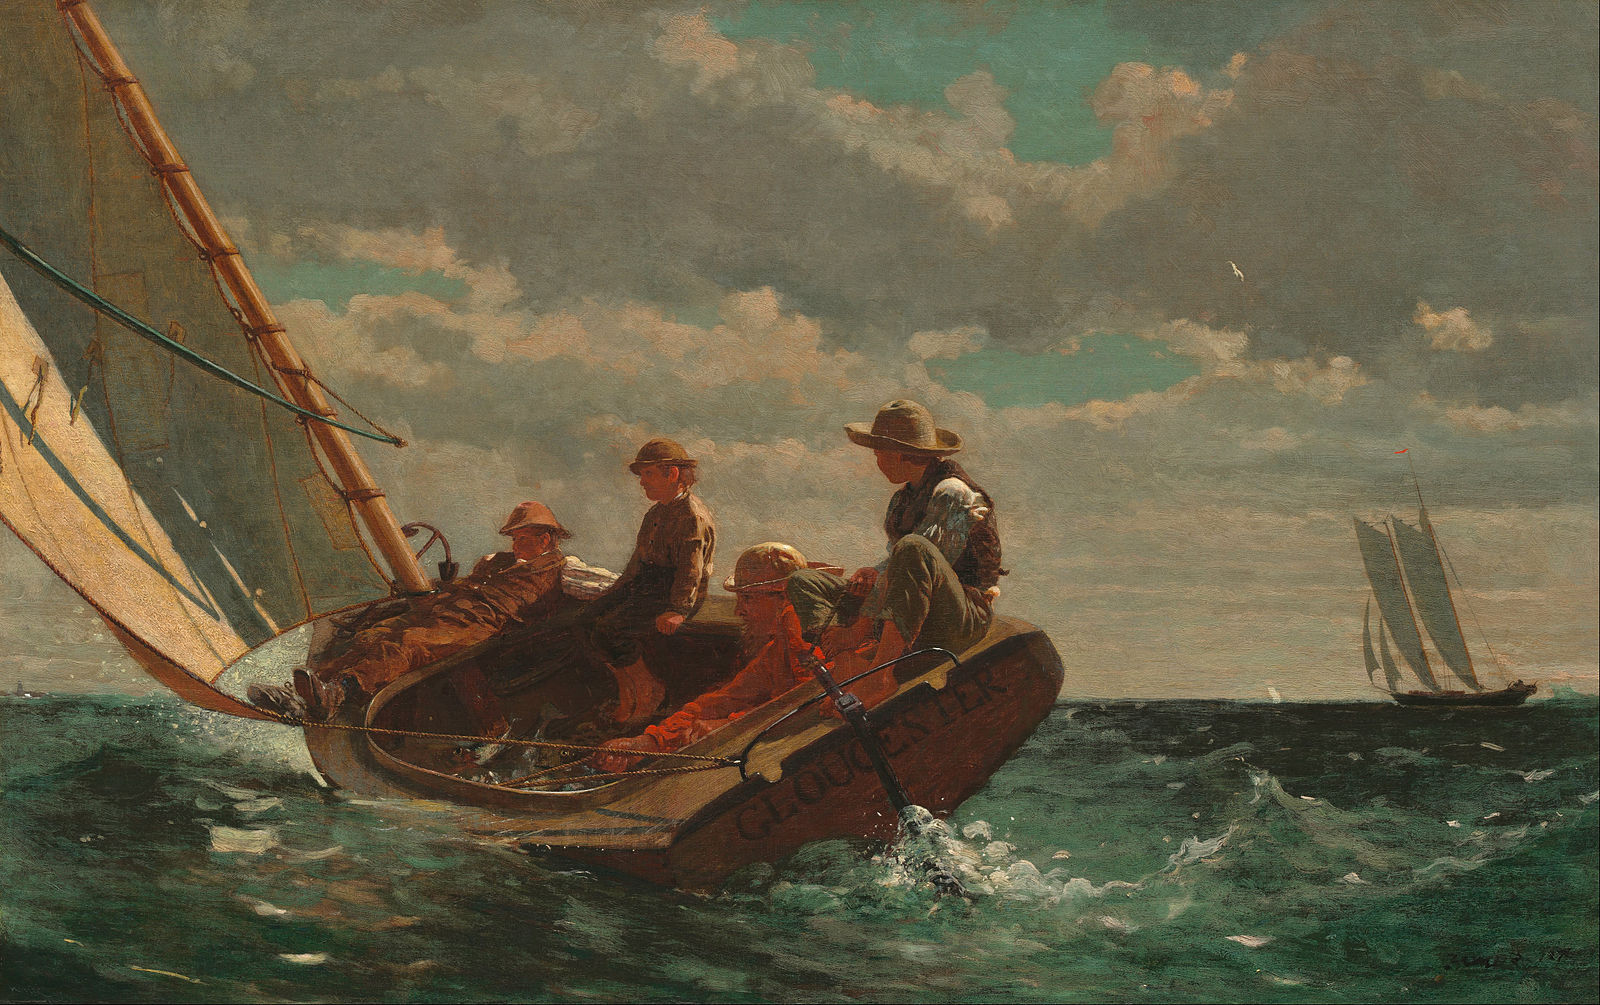 Three boys and a man sailing a boat on the ocean with white caps